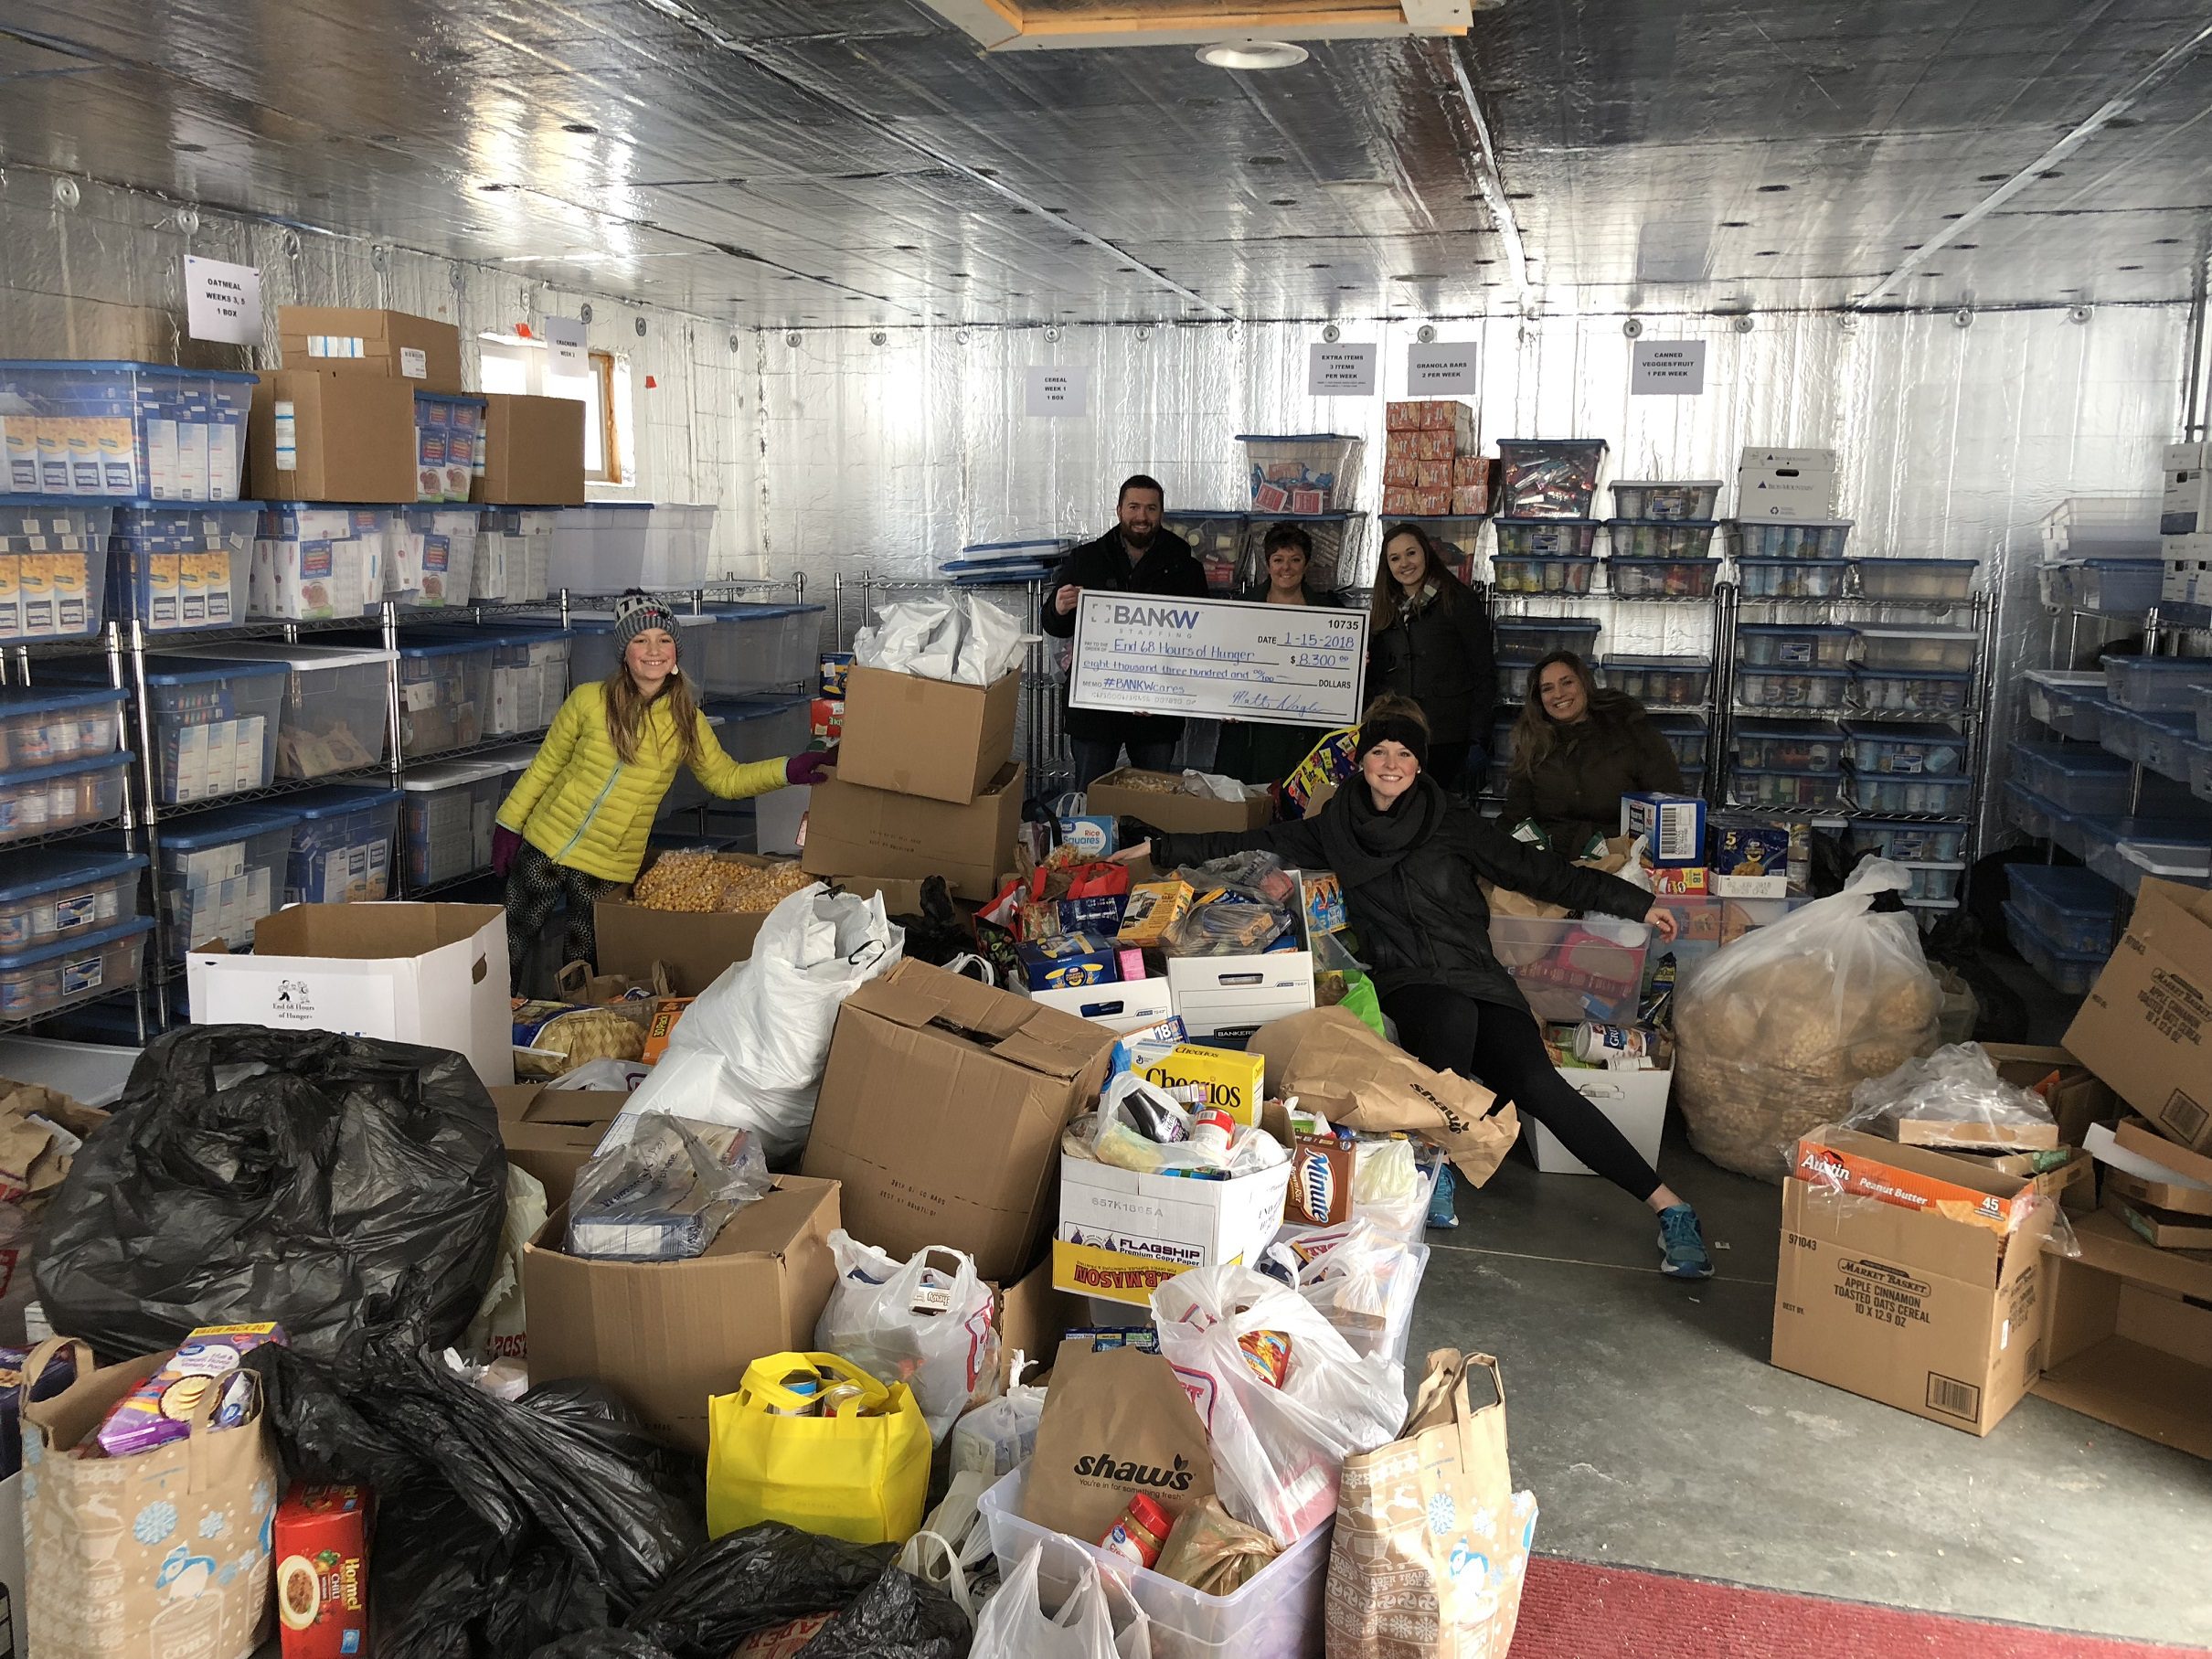 Bankw staffing and clients help to ‘end 68 hours of hunger’ by collecting nearly 3,500 pounds of food and over $8,000 in donations over the holidays